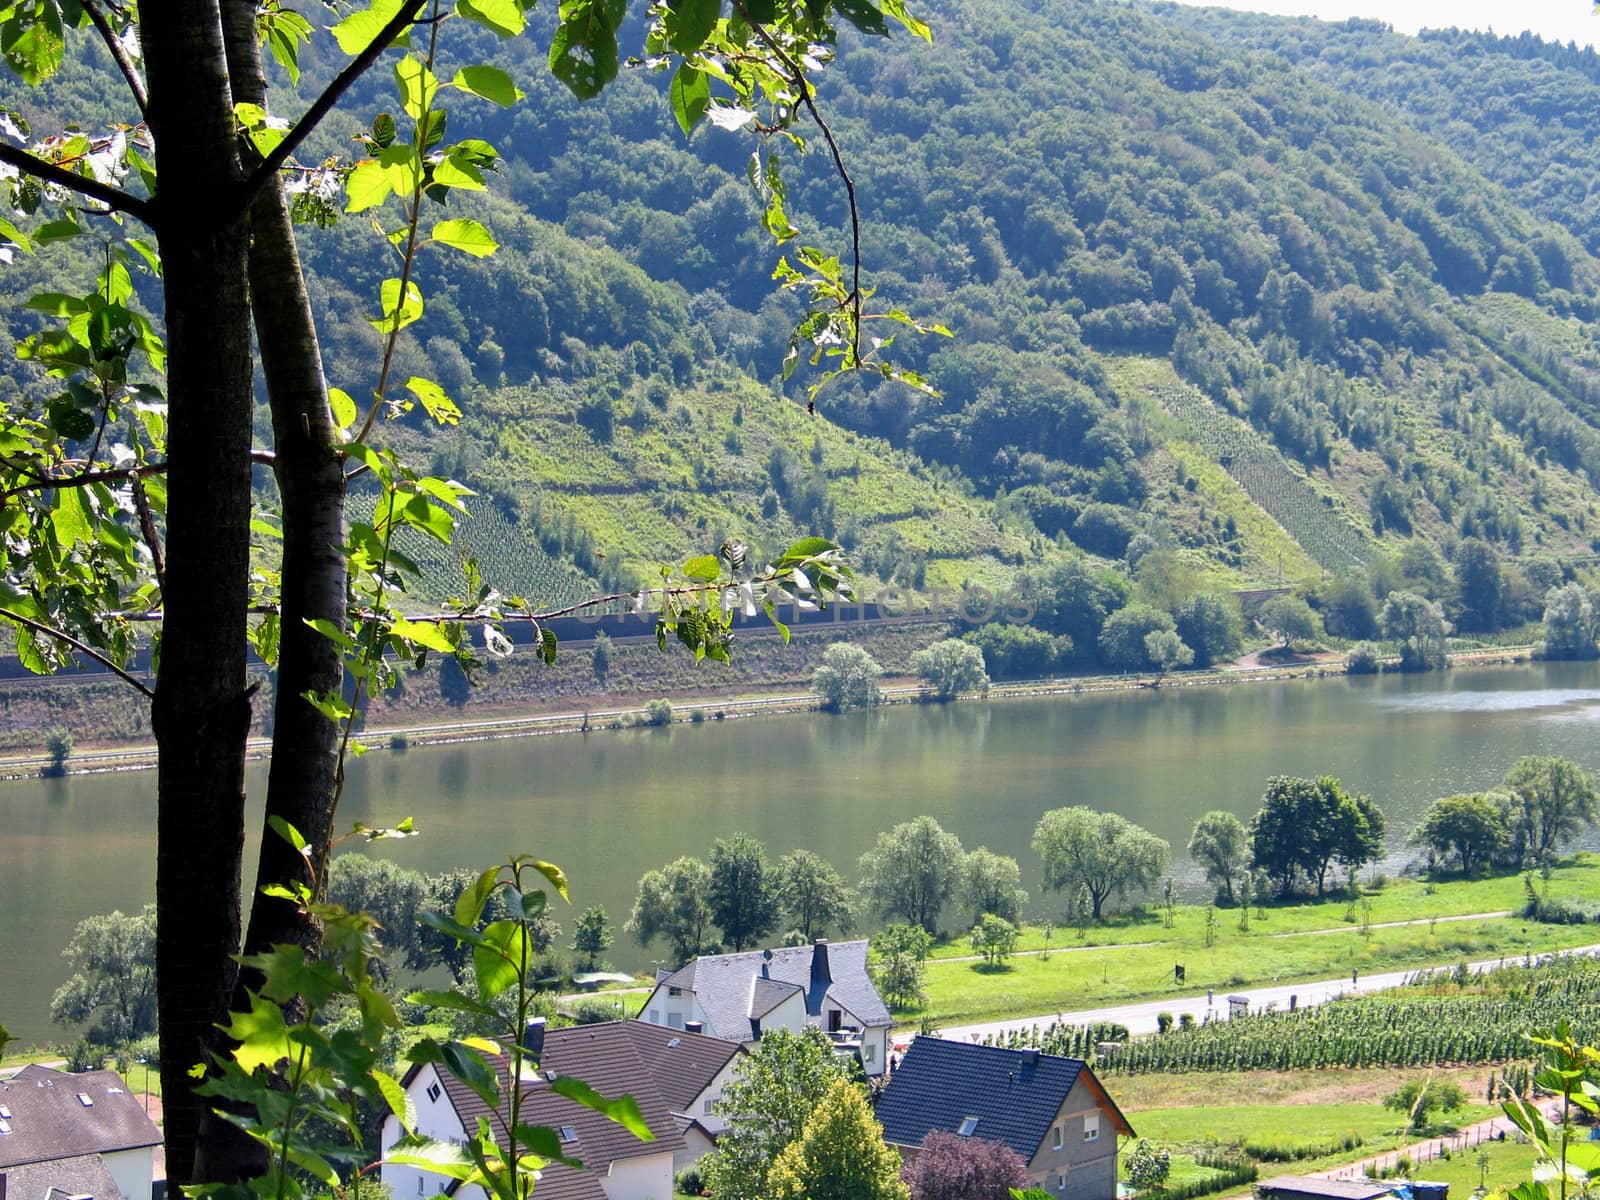 River Mosel Germany by Ronyzmbow